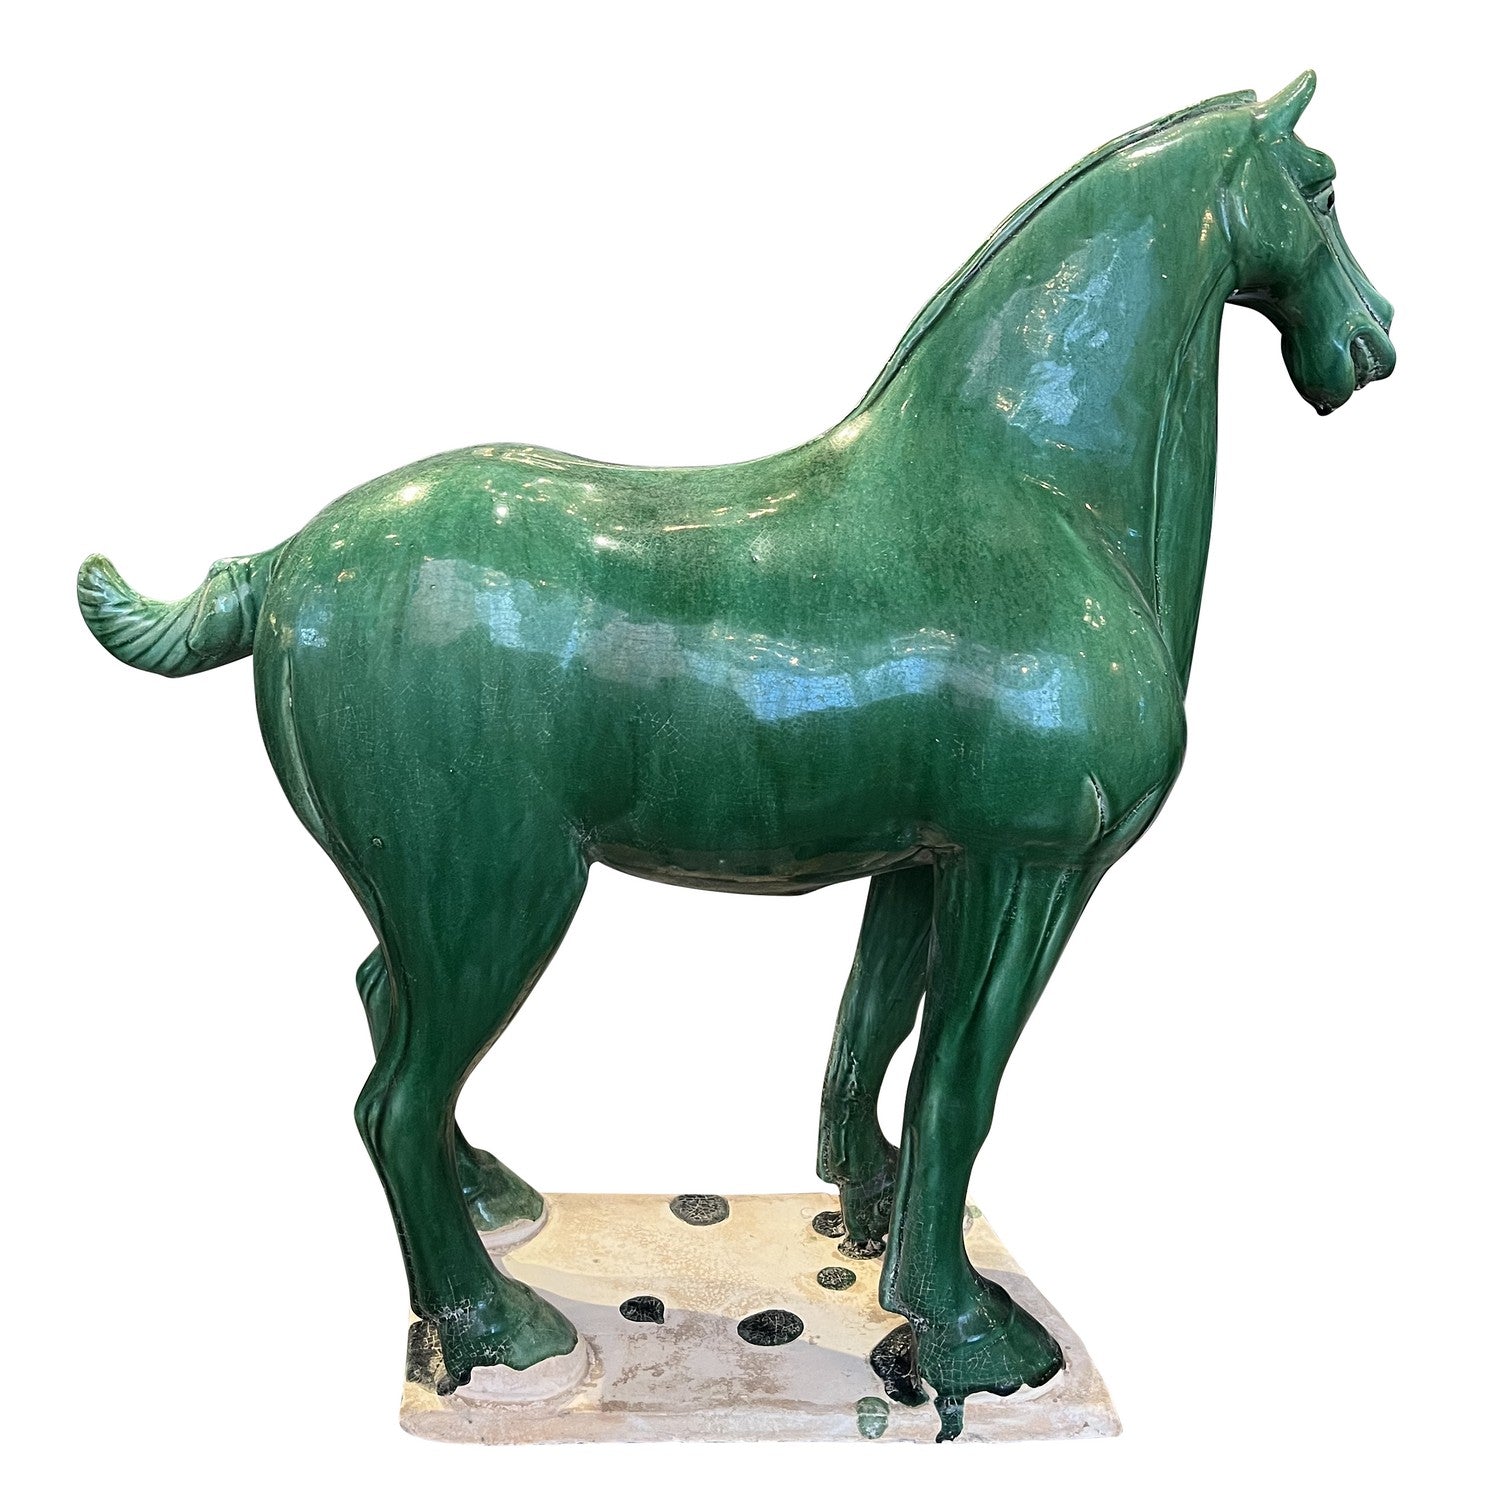 Currey and Company - 1200-0783 - Sculpture - Green